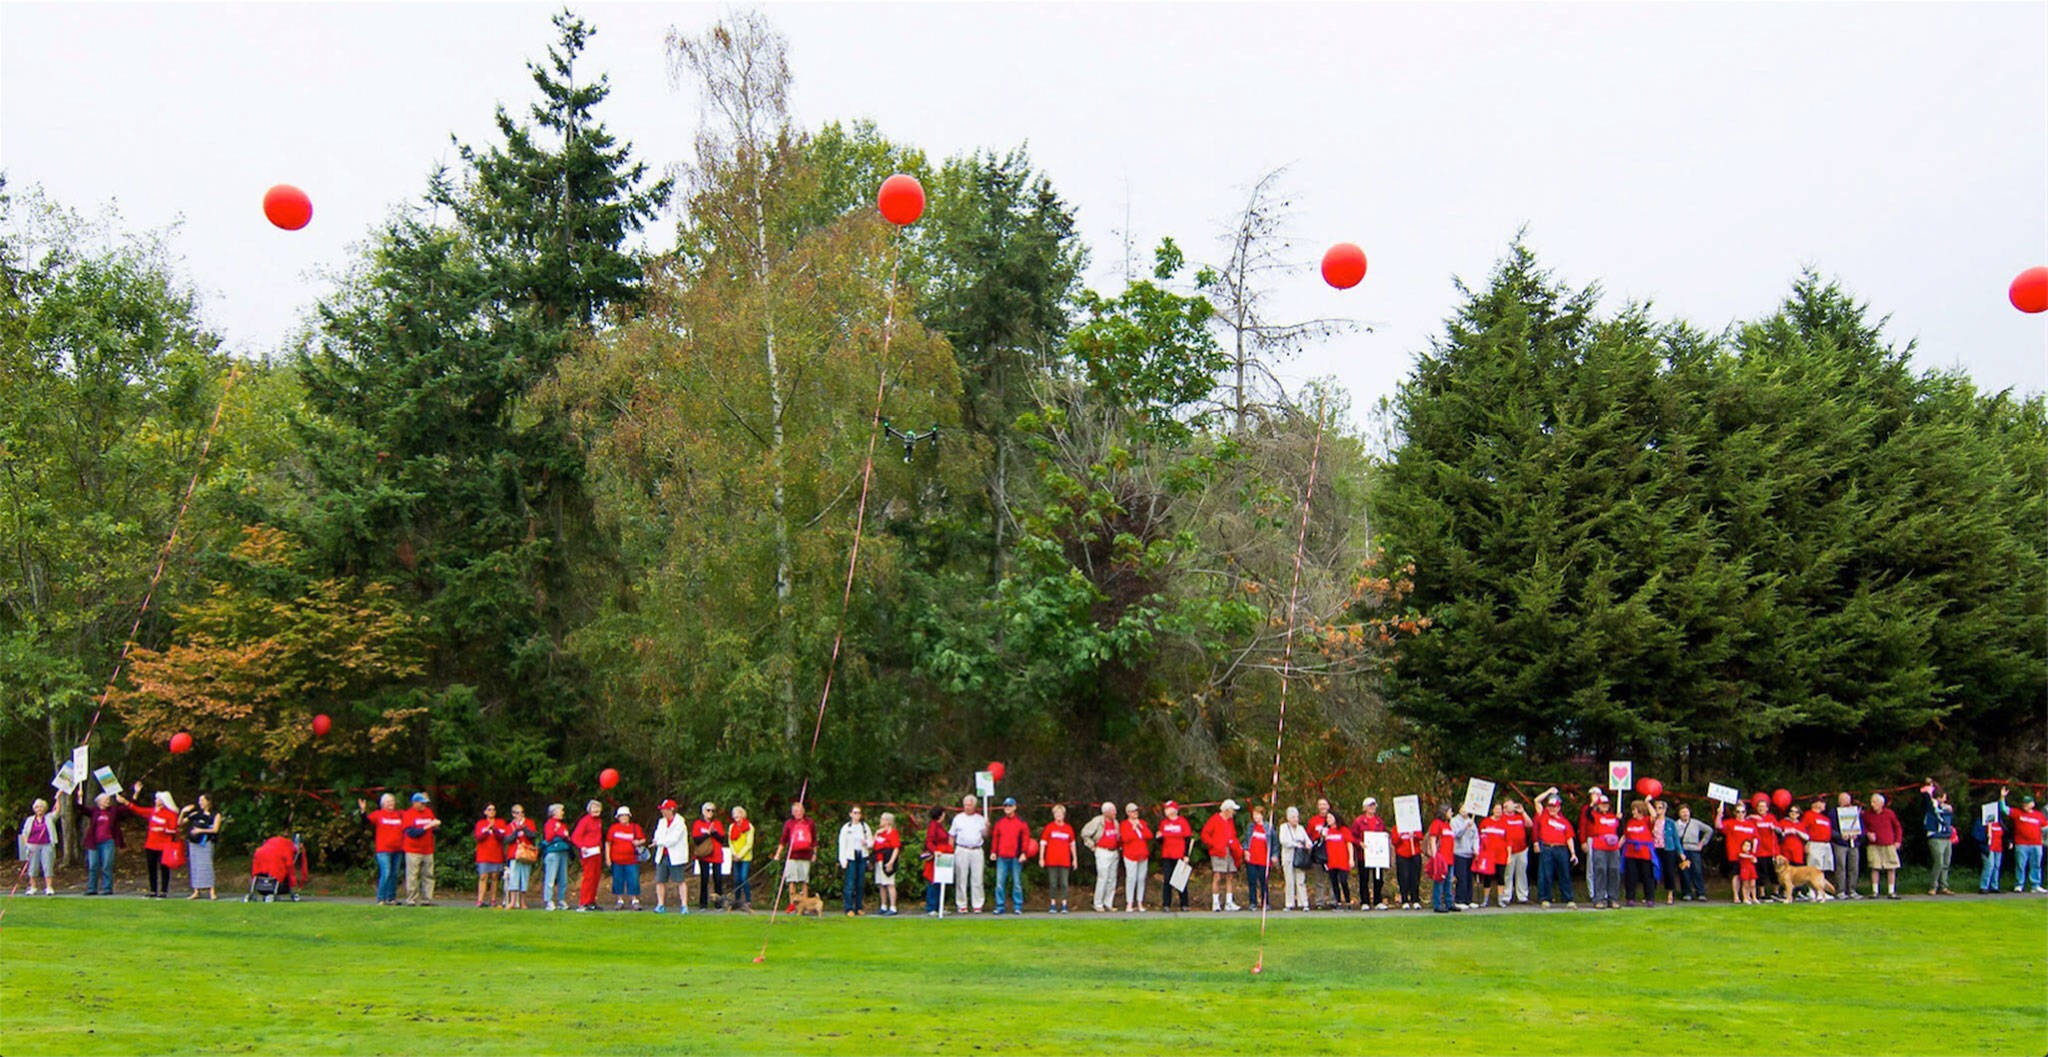 Islanders float red balloons to demonstrate the scale of the proposed Mercer Island Center for the Arts (MICA) in Mercerdale Park. Photo courtesy of Robin Russell